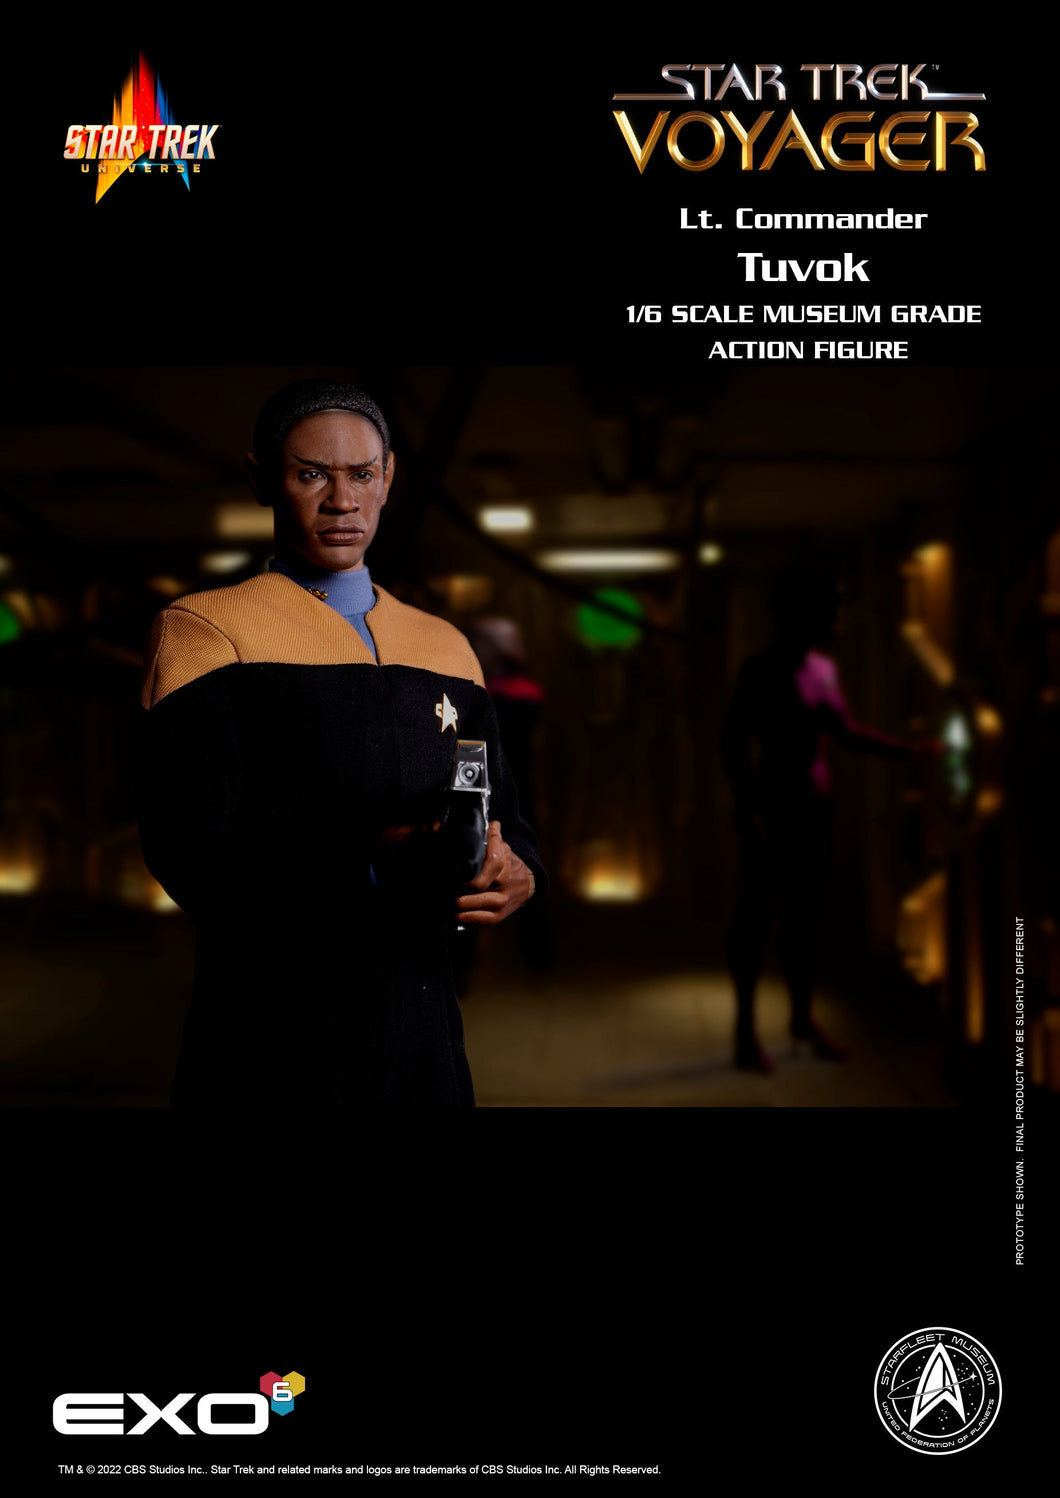 VOY Lt Commander Tuvok - Immediate Purchase (One per customer) SOLD OUT